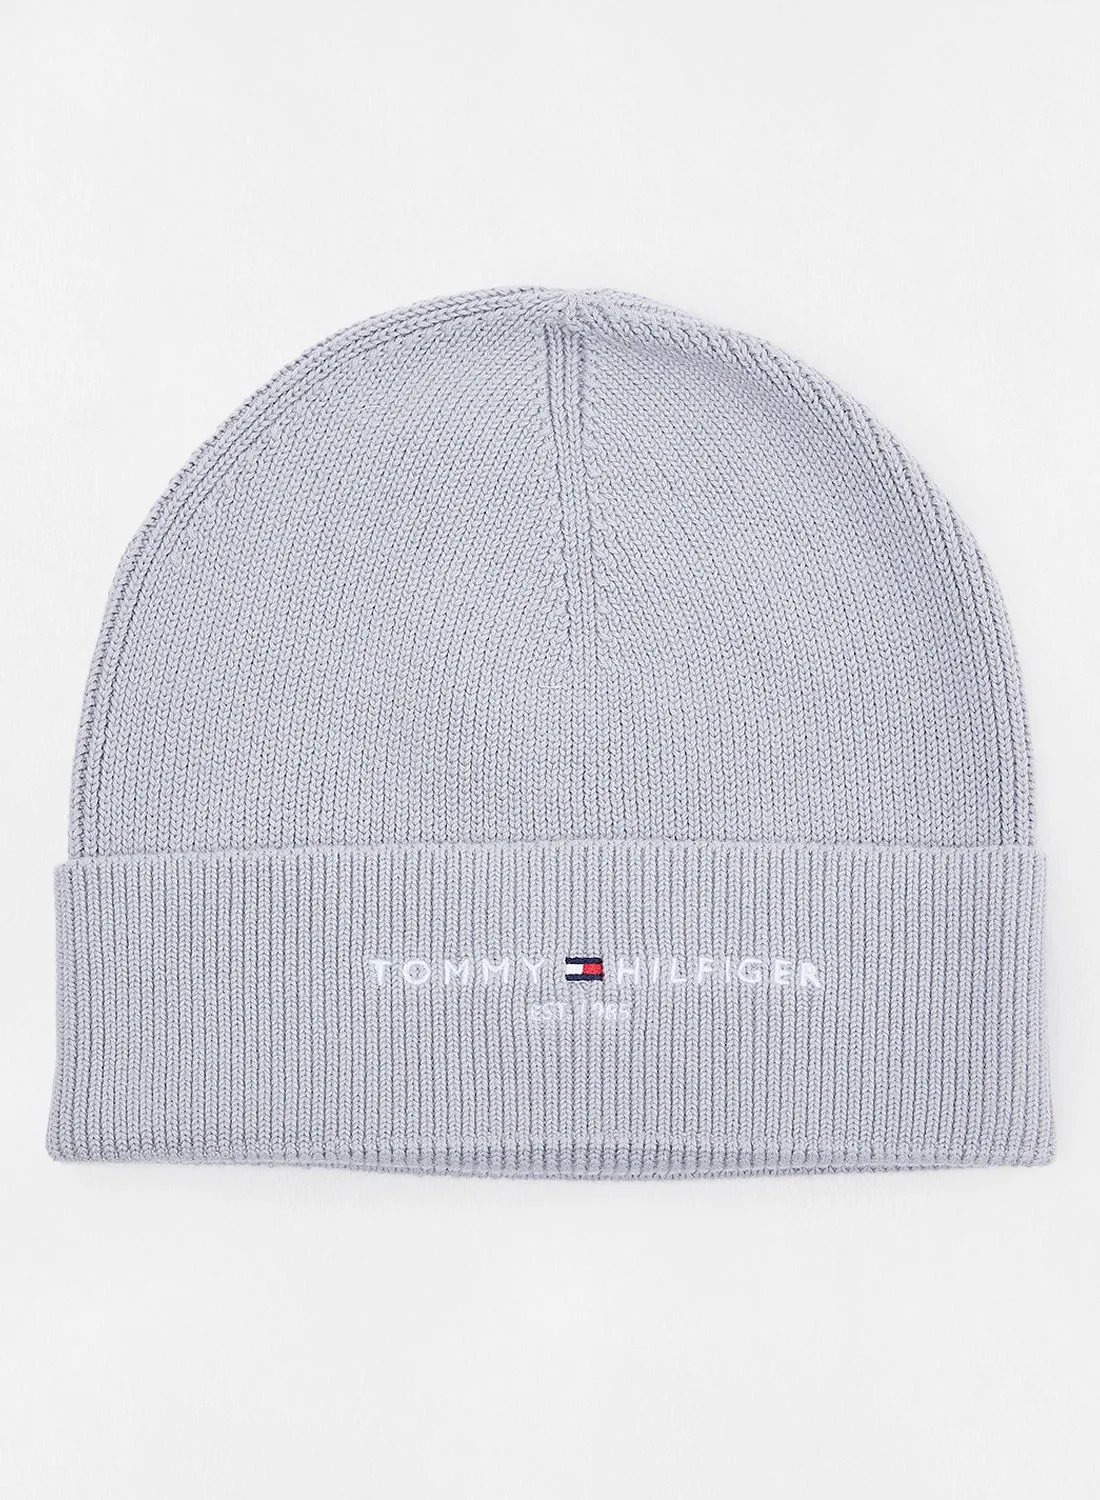 TOMMY HILFIGER Established Knitted Cotton Beanie